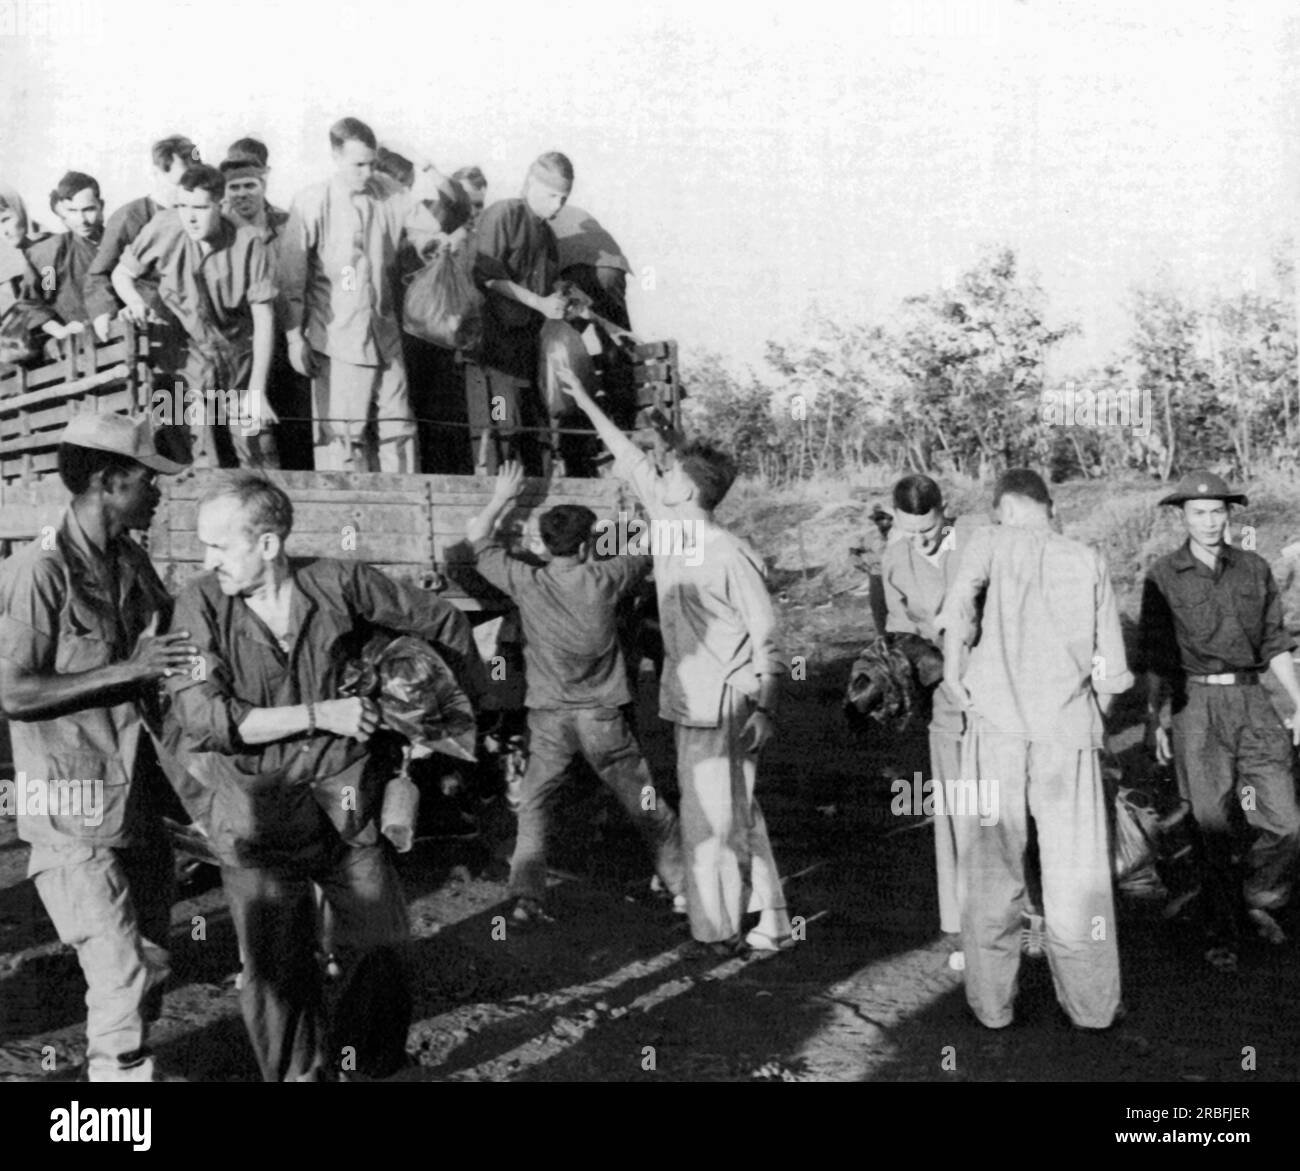 Vietnam:   February 13, 1973 American POWs alight from a truck somewhere in South Vietnam after their release by North Vietnam. Stock Photo